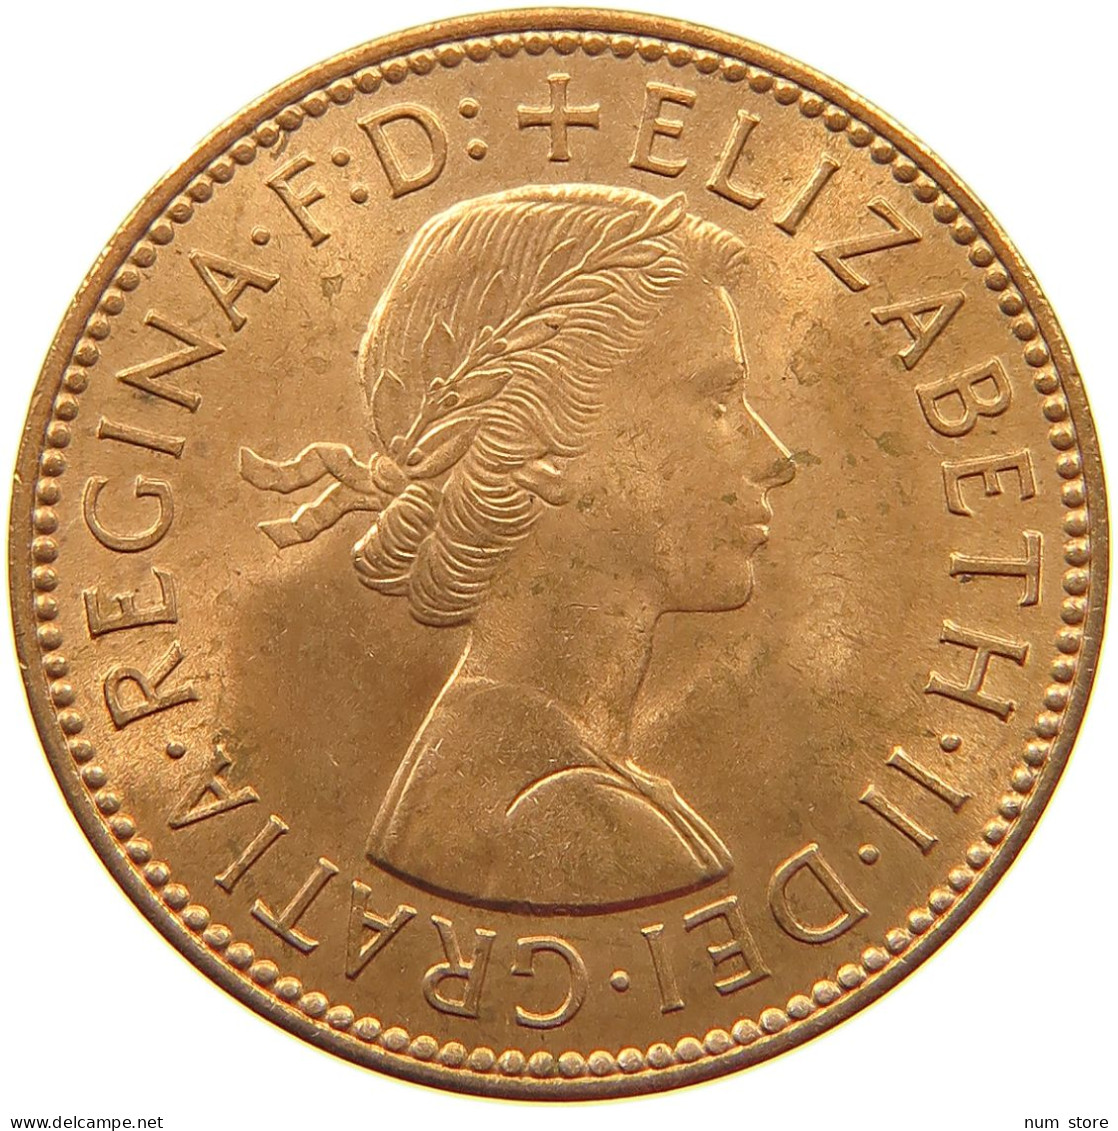 GREAT BRITAIN HALFPENNY 1963 TOP #a039 0317 - C. 1/2 Penny